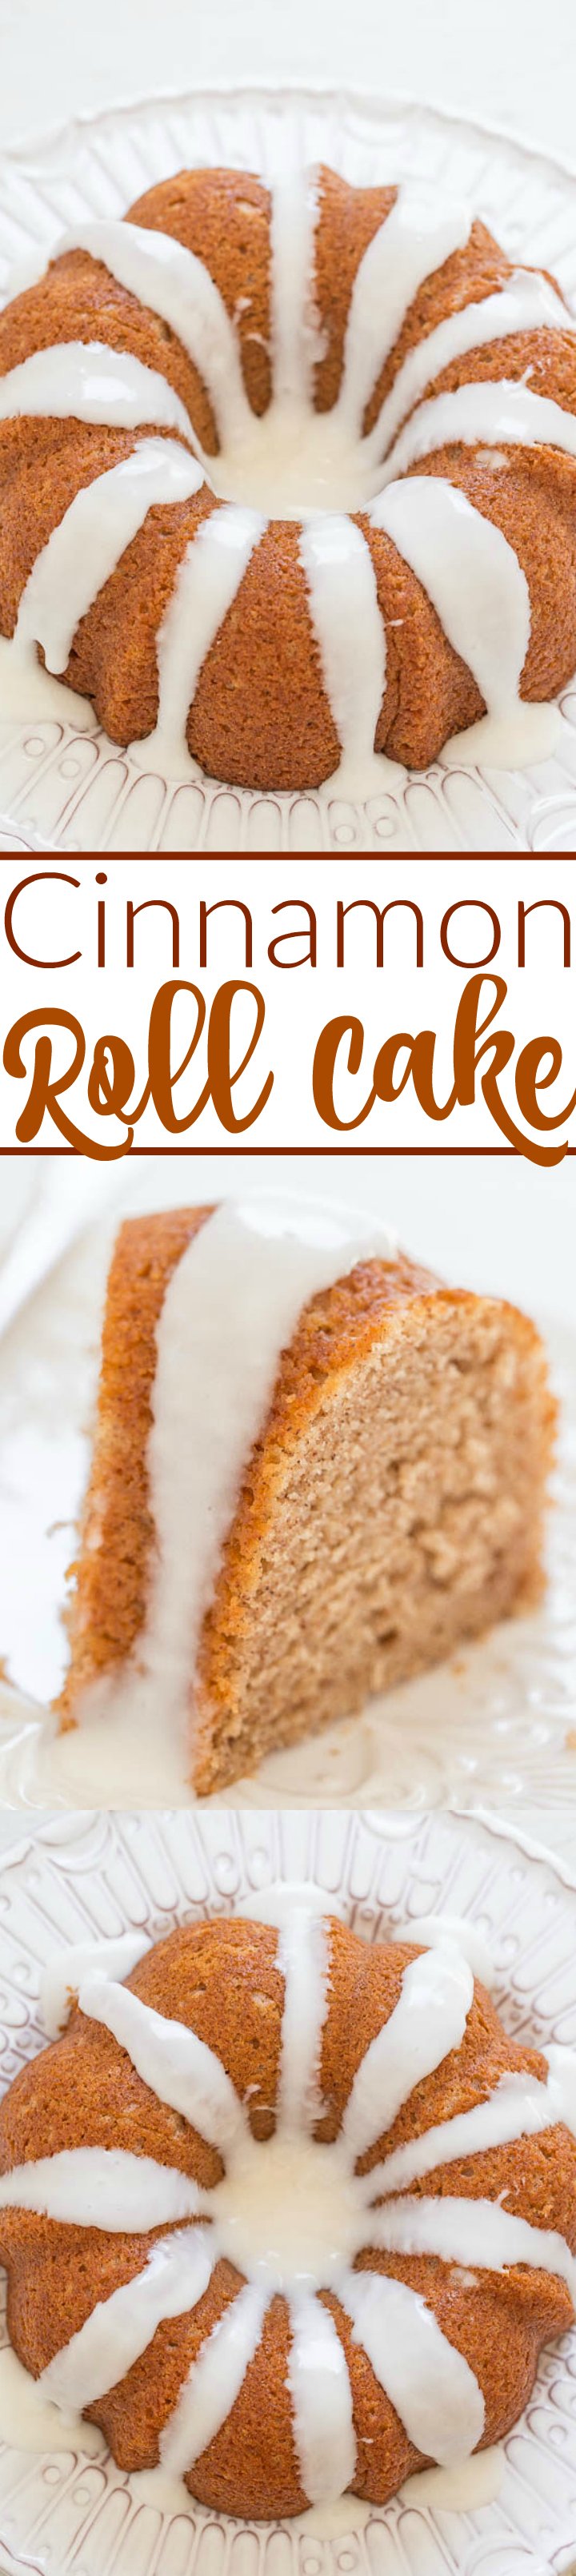 Glazed Cinnamon Roll Cake - The flavor of cinnamon rolls in a soft, tender, EASY cake!! One bowl, no mixer, and you're going to love the tangy-sweet GLAZE!!